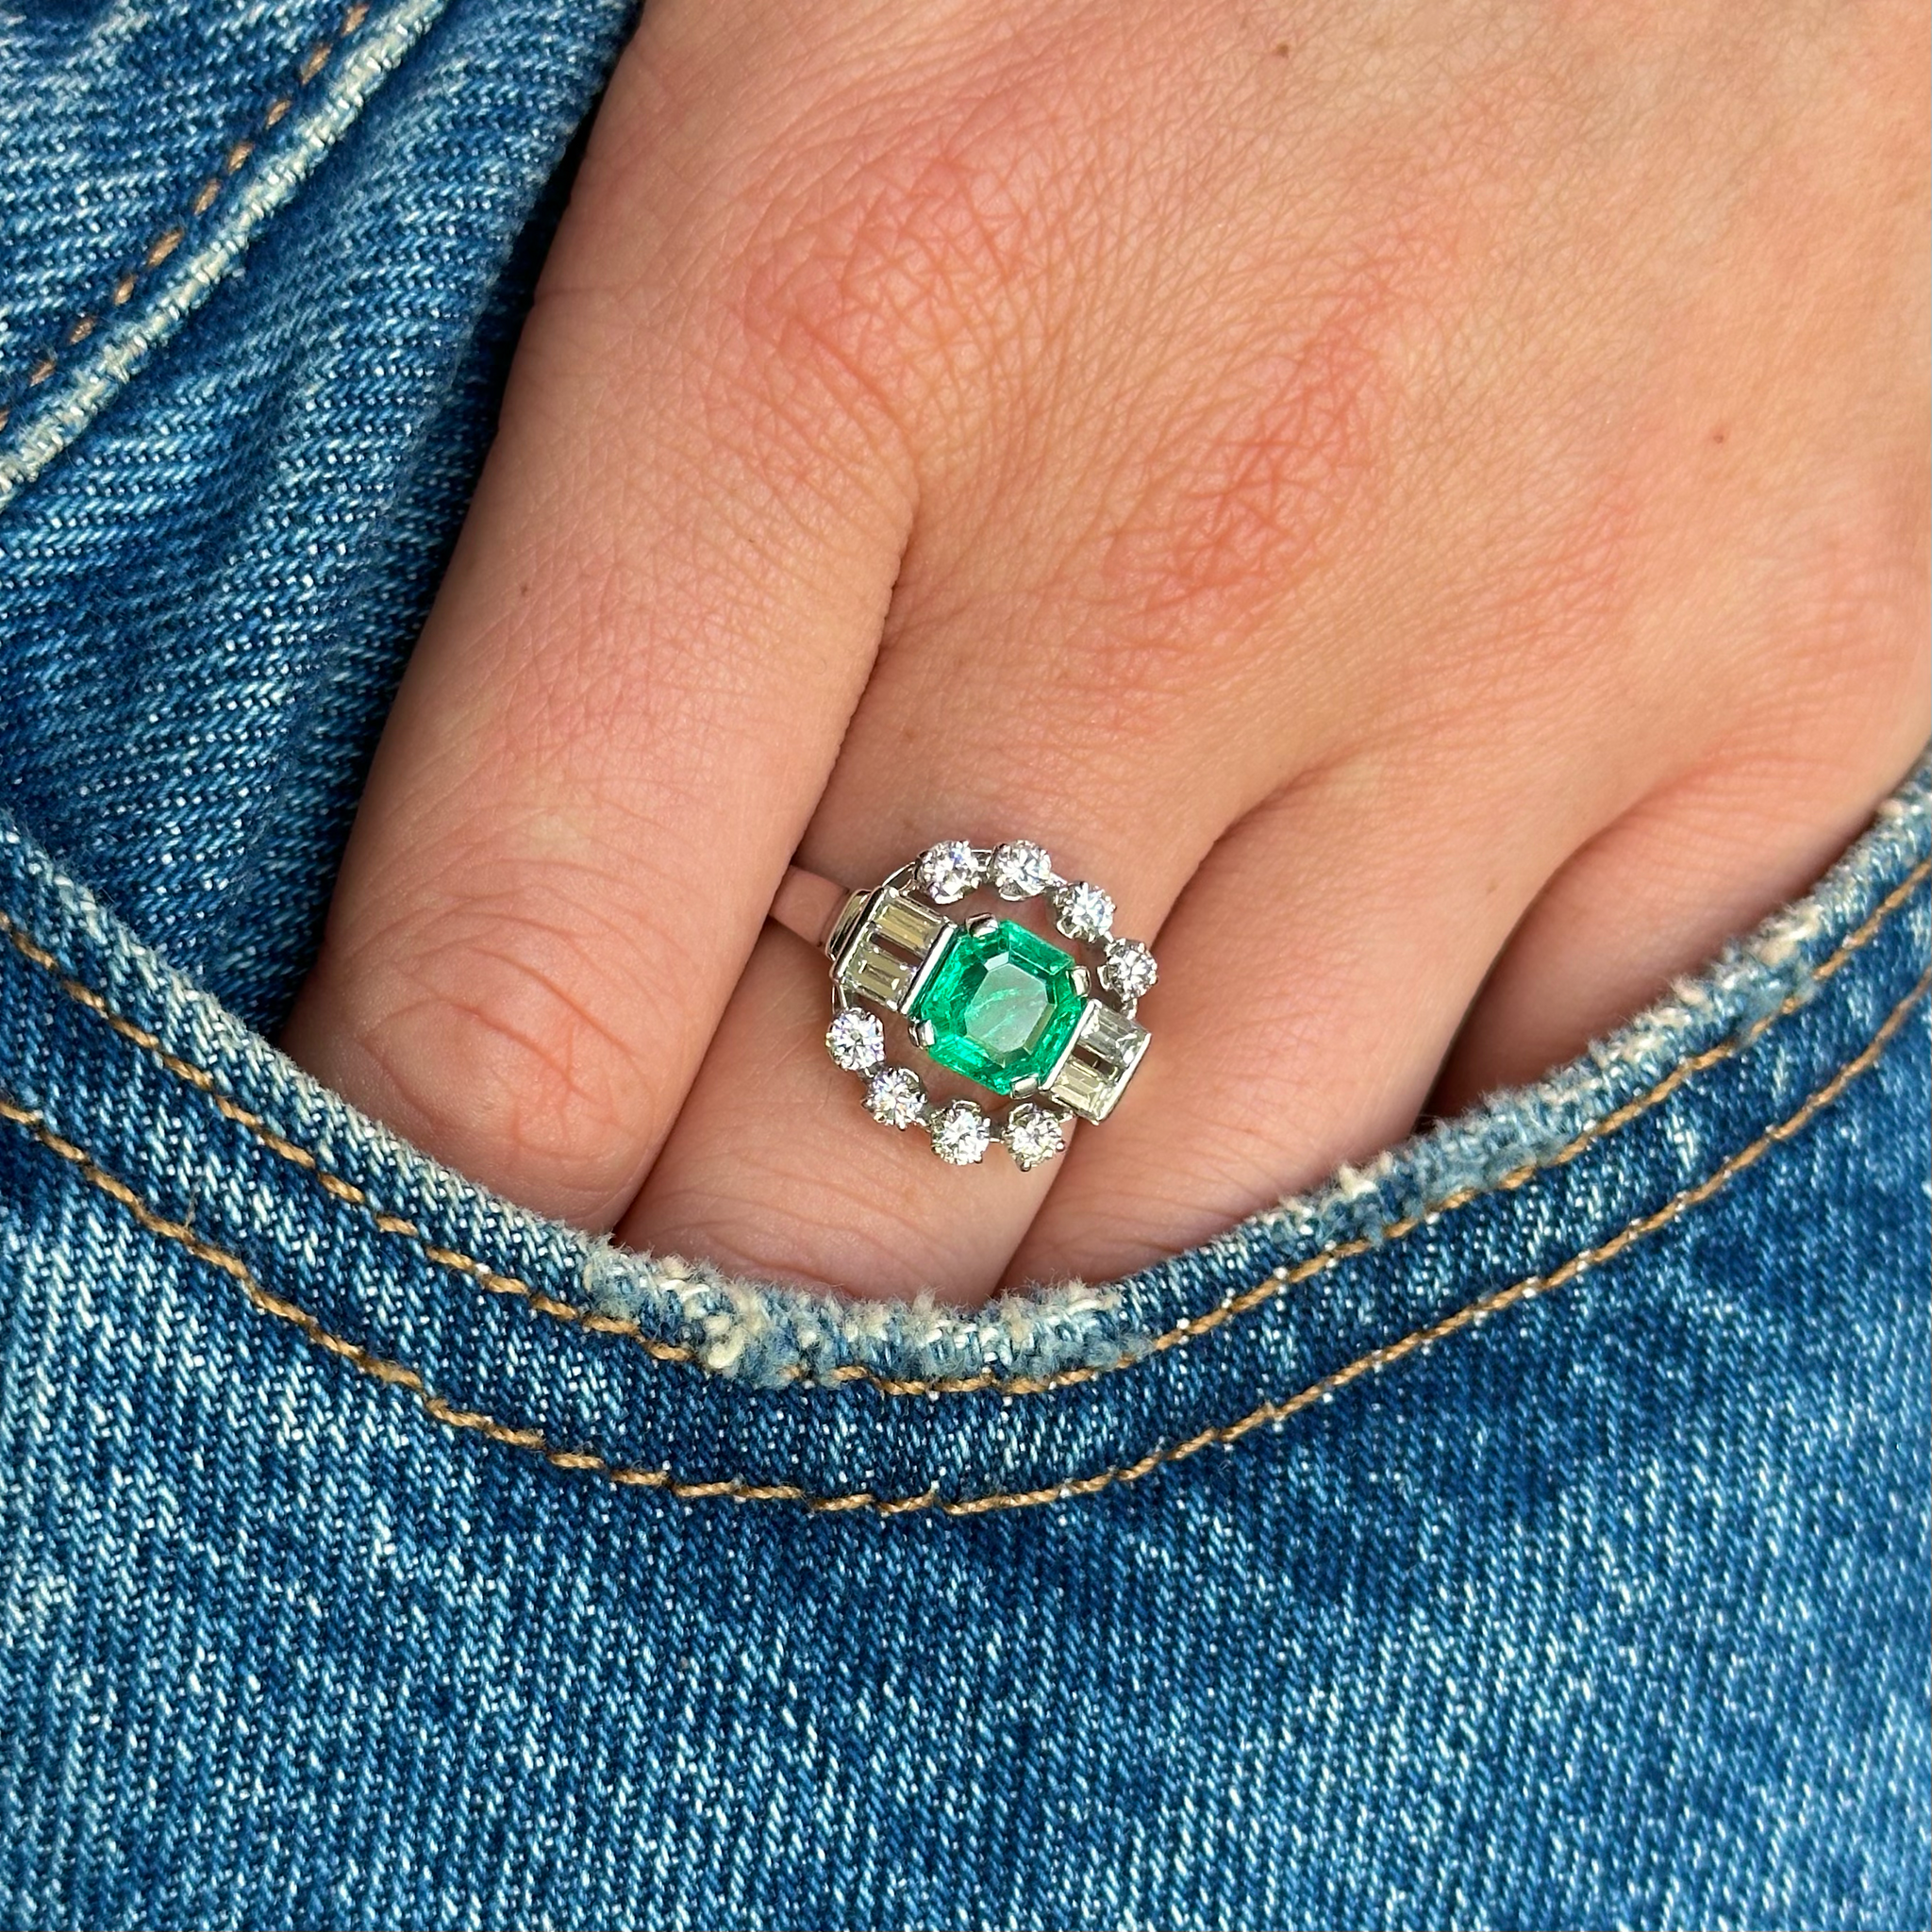 vintage diamond and emerald ring worn on hand in pocket of jeans.